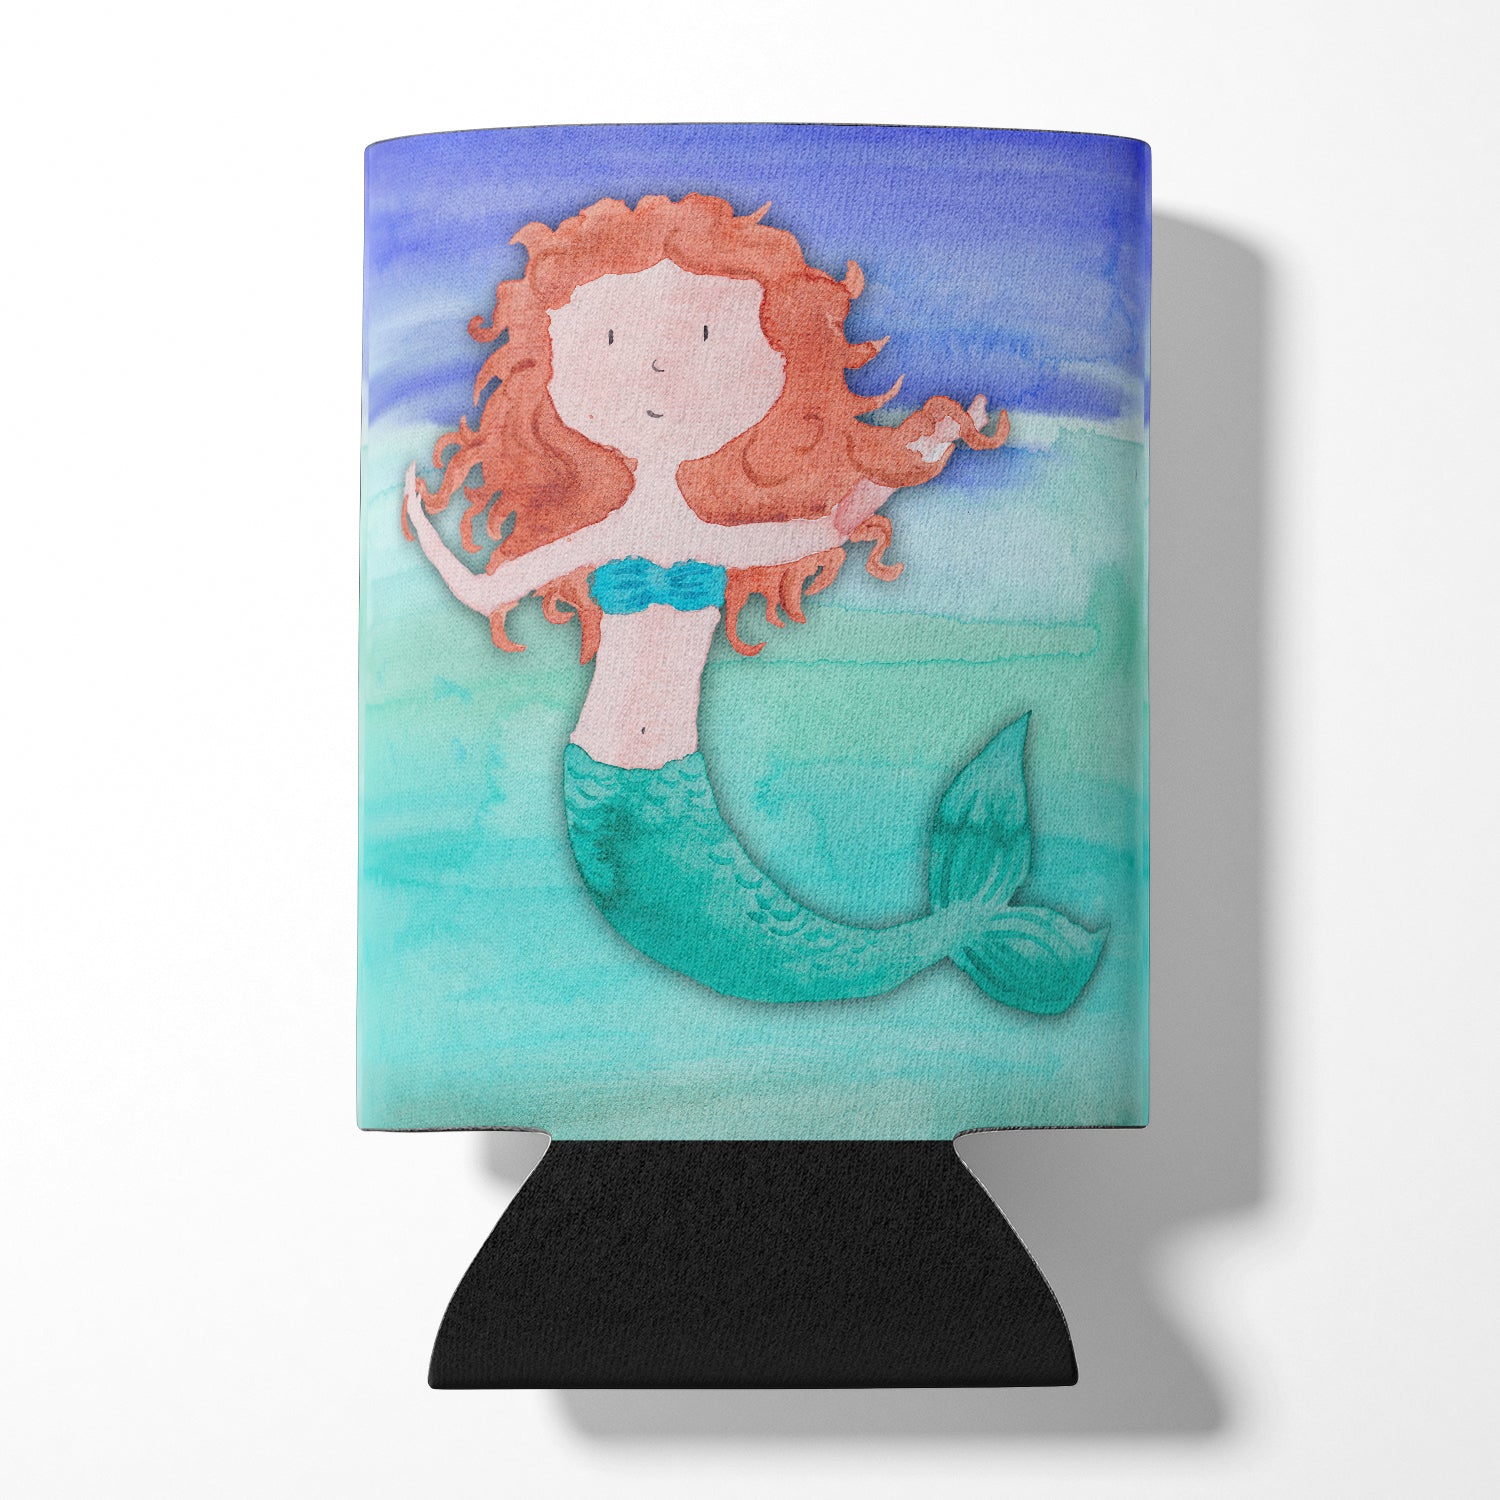 Ginger Mermaid Watercolor Can or Bottle Hugger BB7421CC  the-store.com.